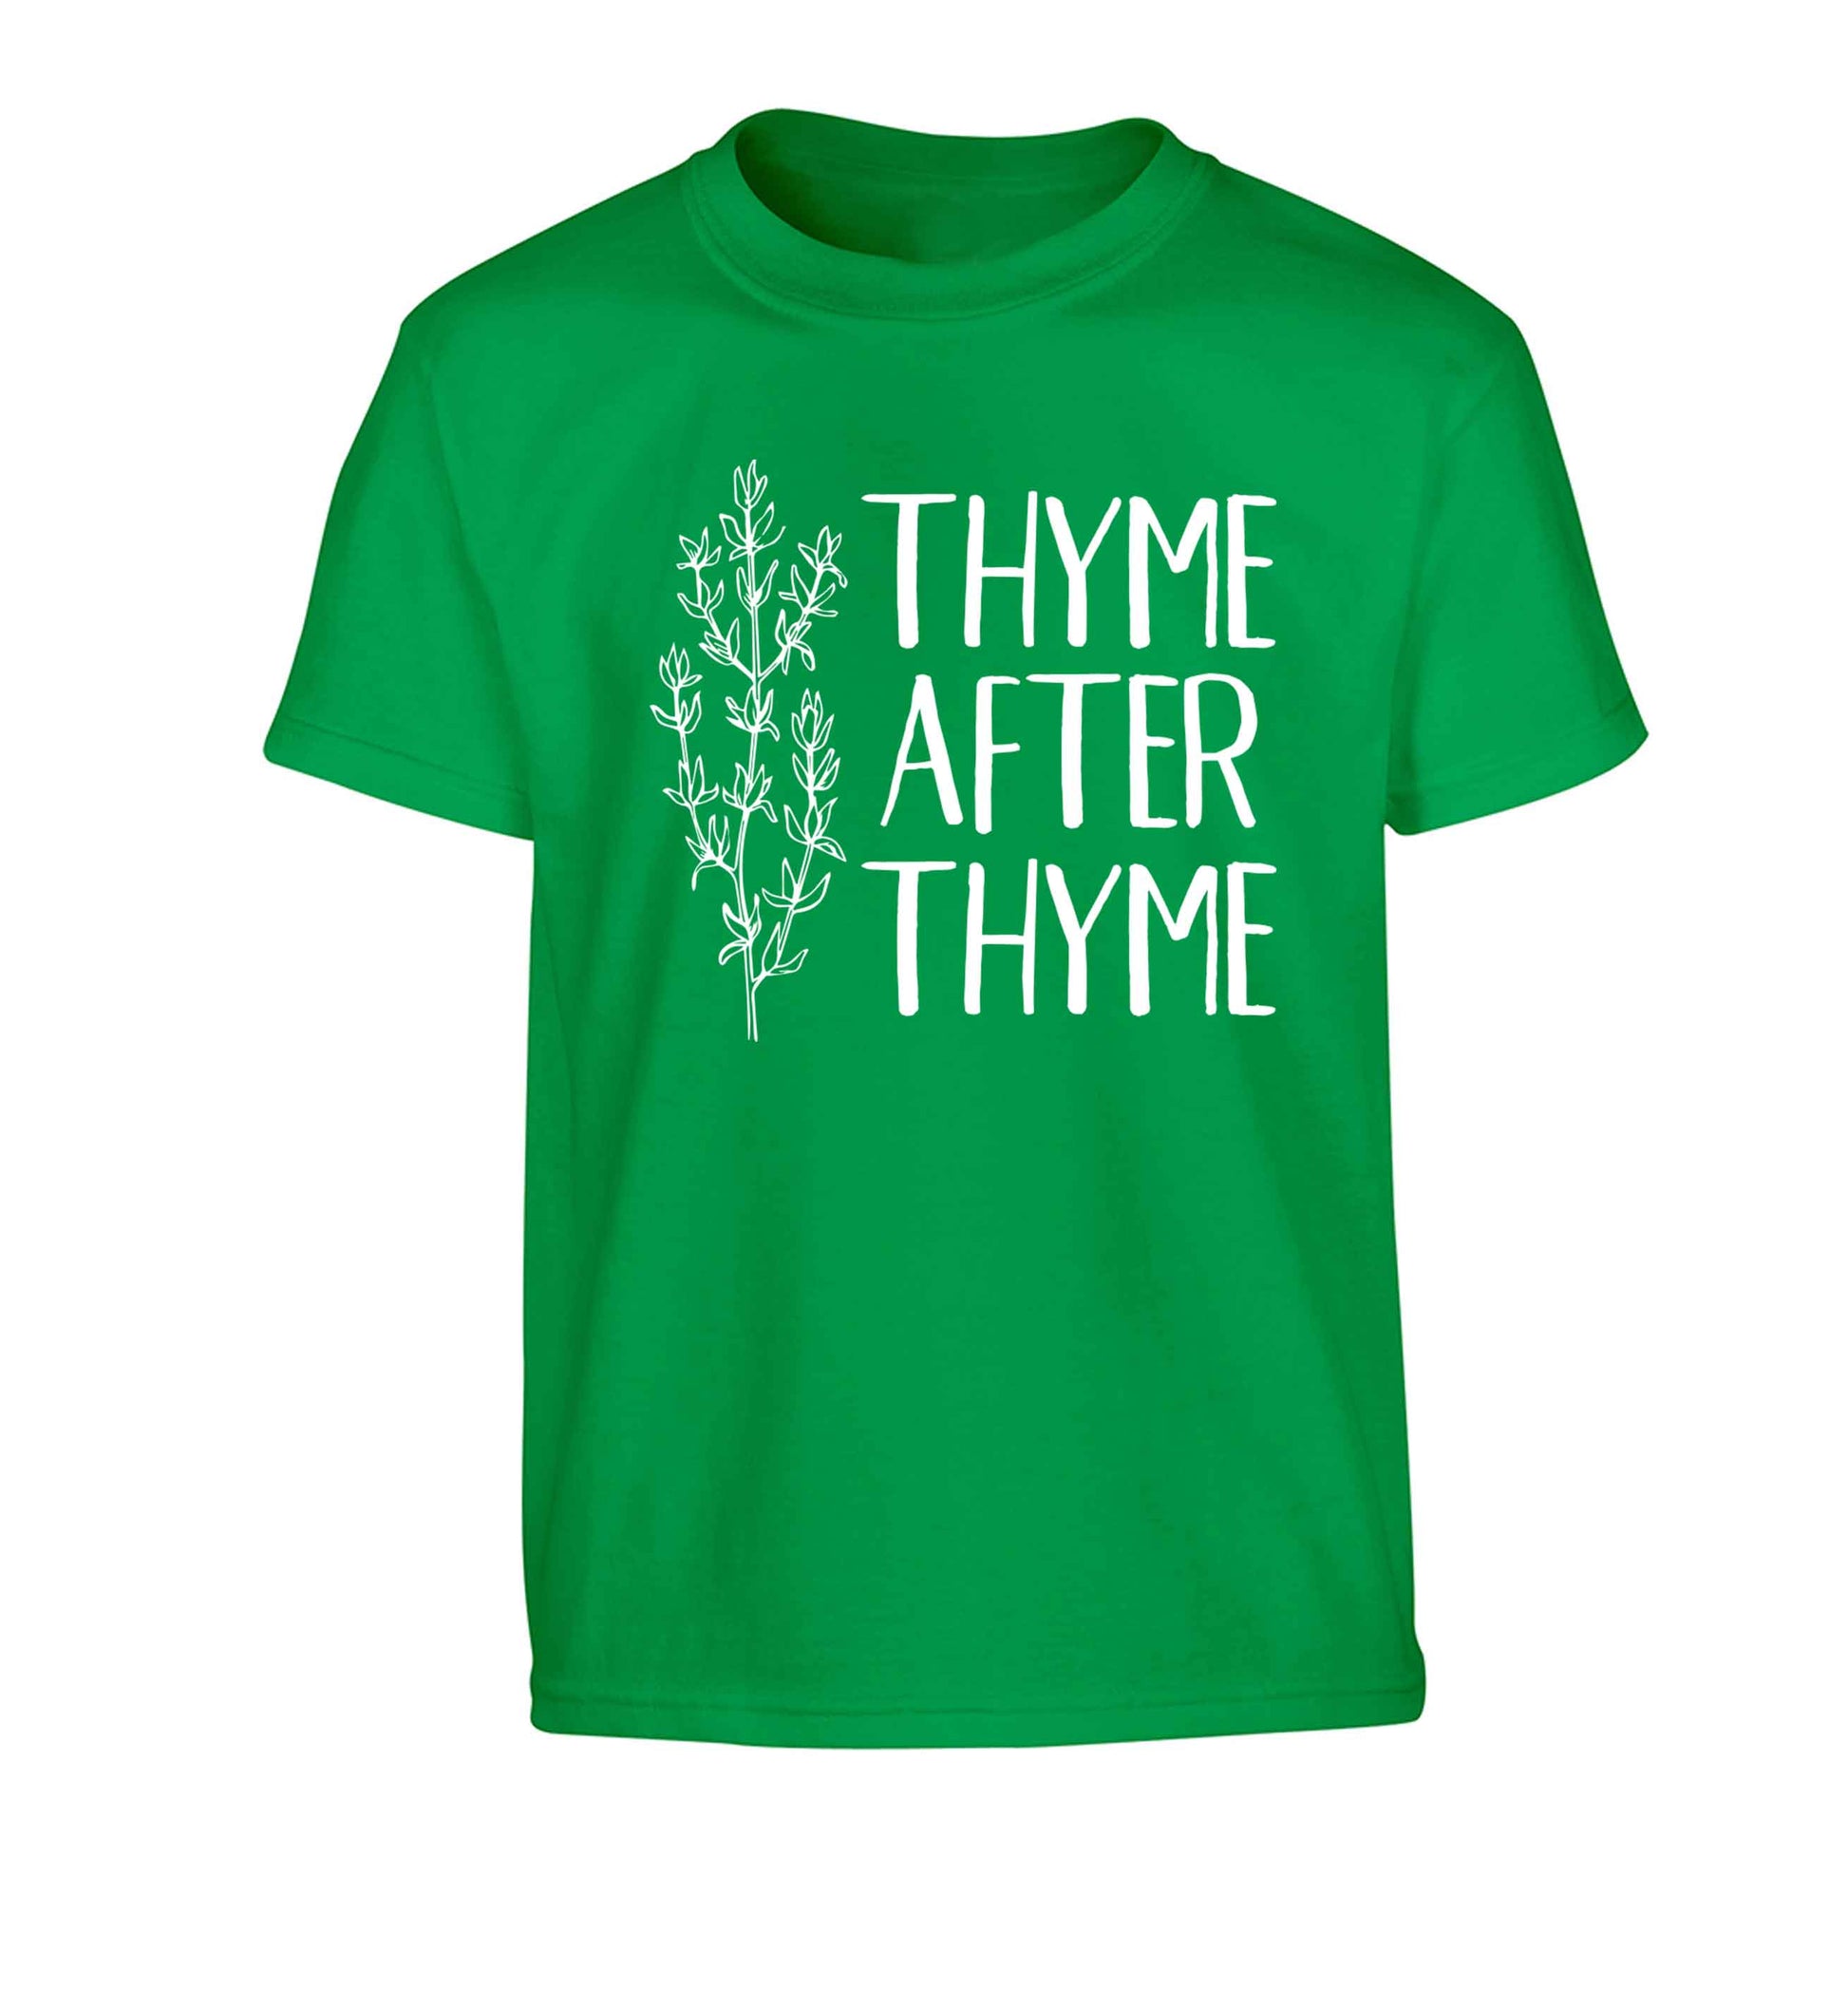 Thyme after thyme Children's green Tshirt 12-13 Years